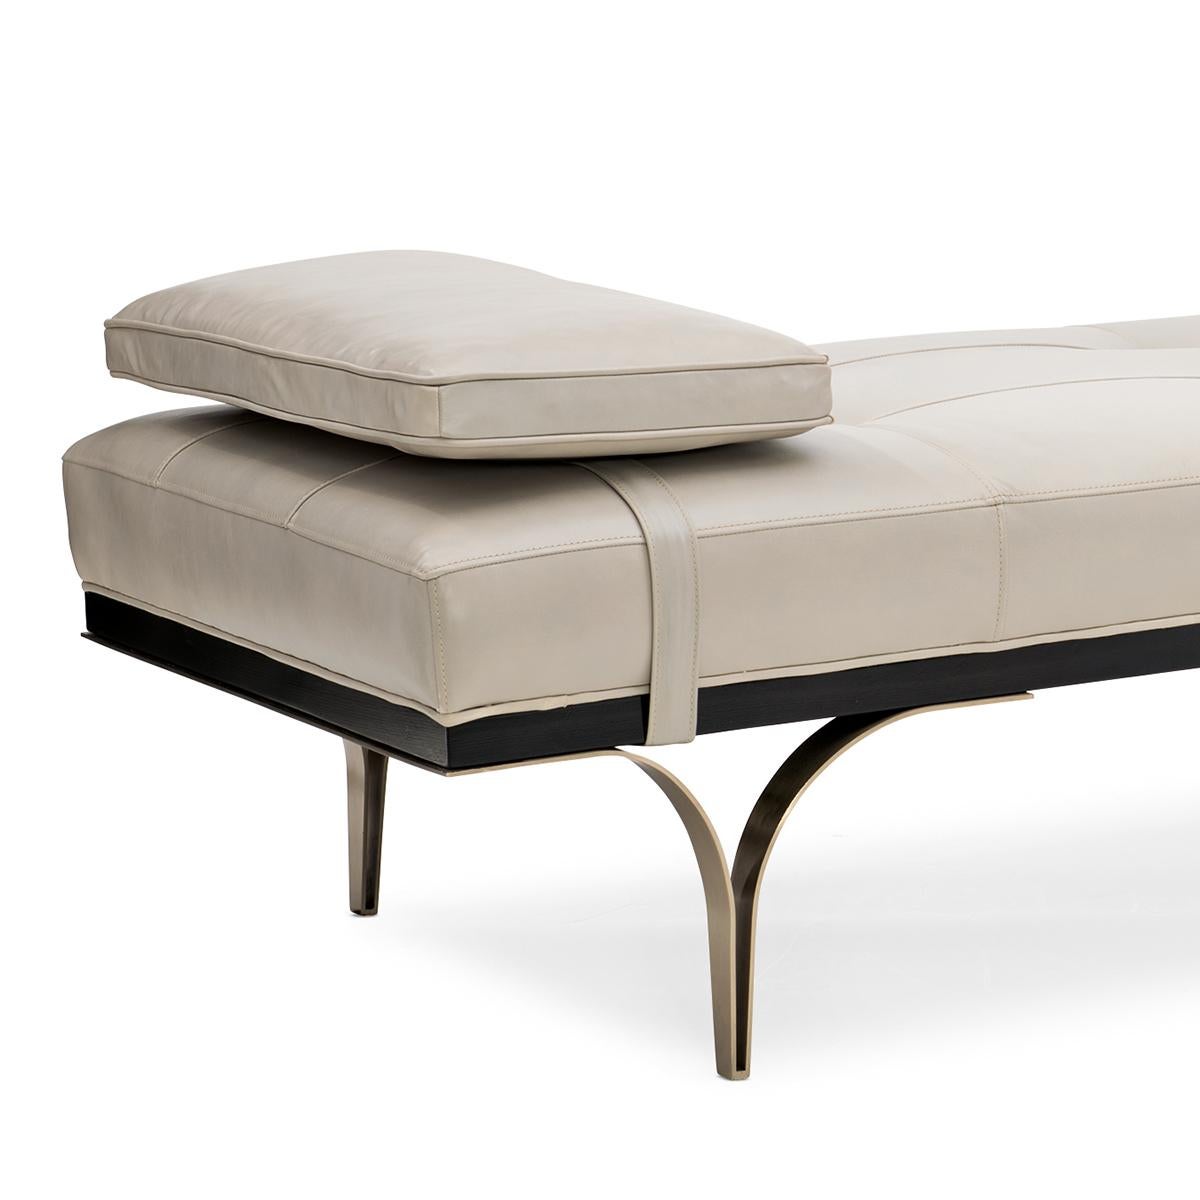 Mid-Century Modern style daybed, designed for daydreaming, this daybed is truly lounge-worthy. Clean lines and elegant tailoring distinguish its appearance and are enhanced by a semi-aniline cover tufted in a modern grid pattern. A plush pillow